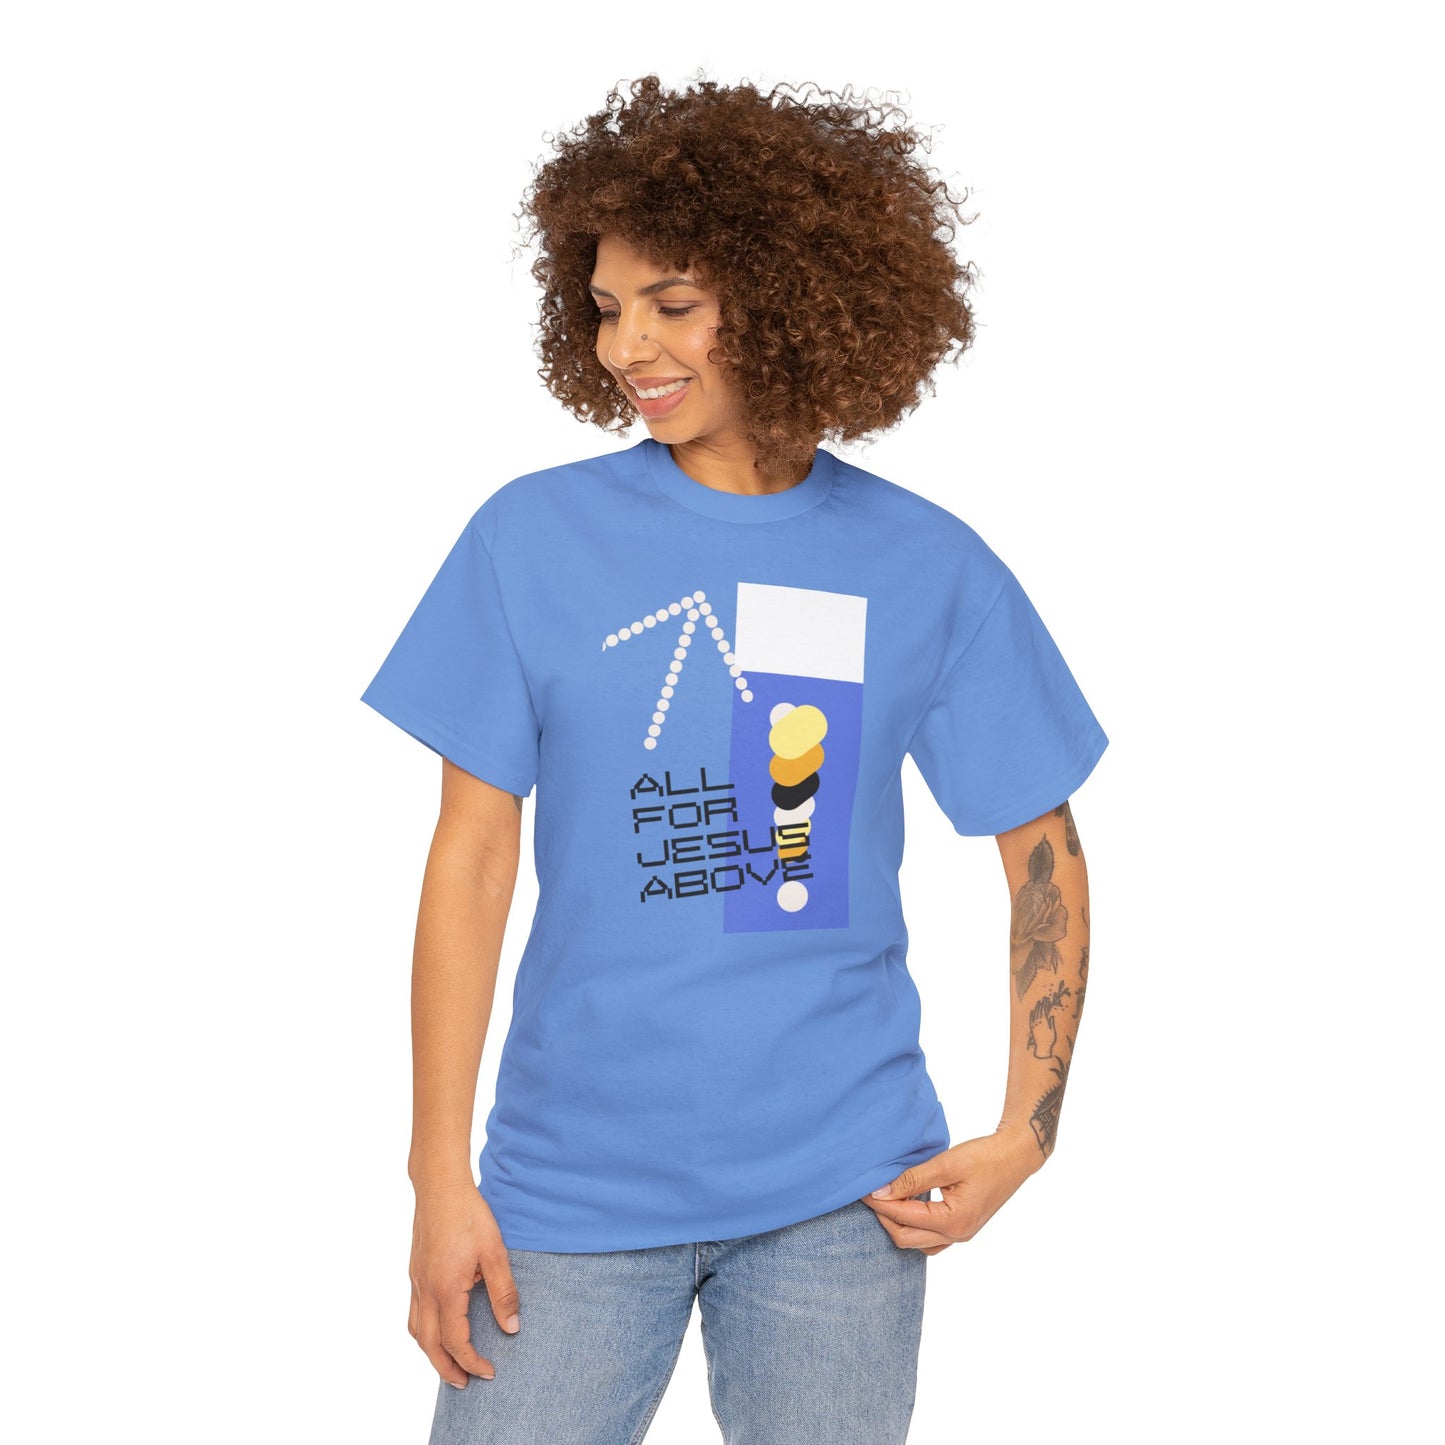 All For Jesus Above Short-Sleeve T-Shirt